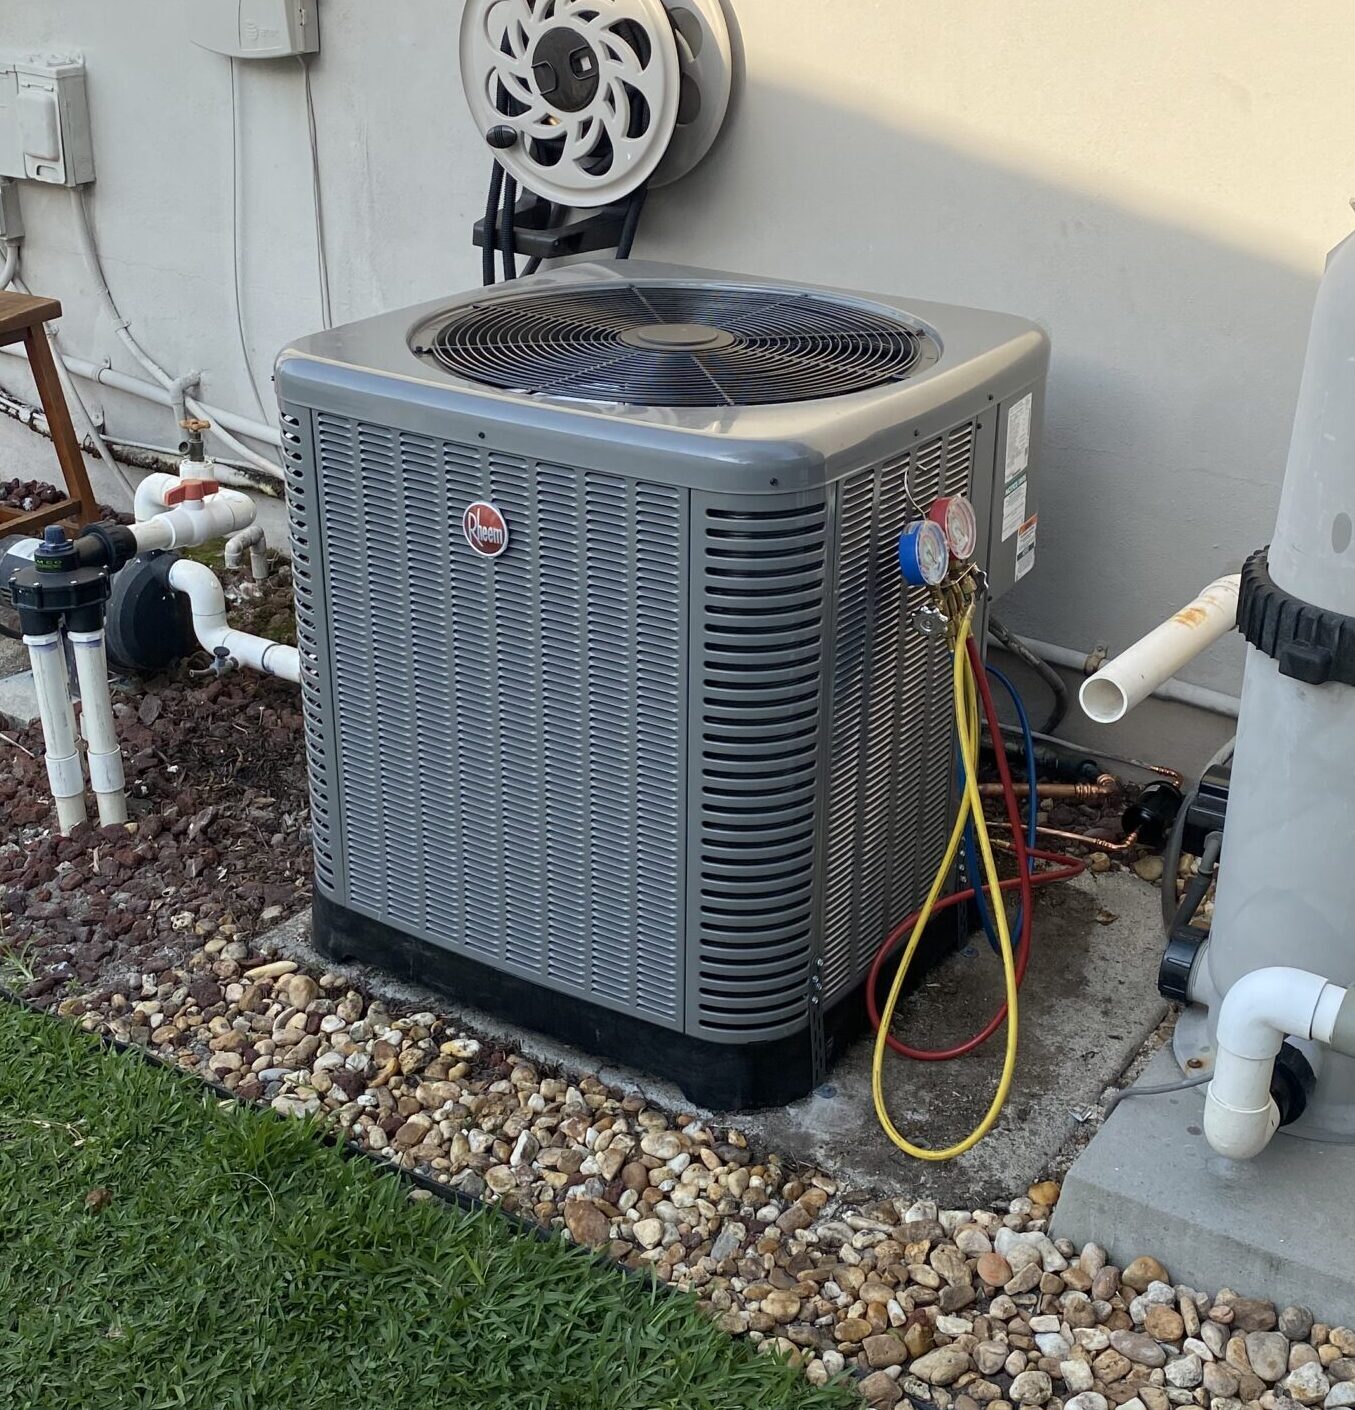 McGregor Air Conditioning: More Than 10 Years of Excellence in AC Installations, Repairs, and Replacements